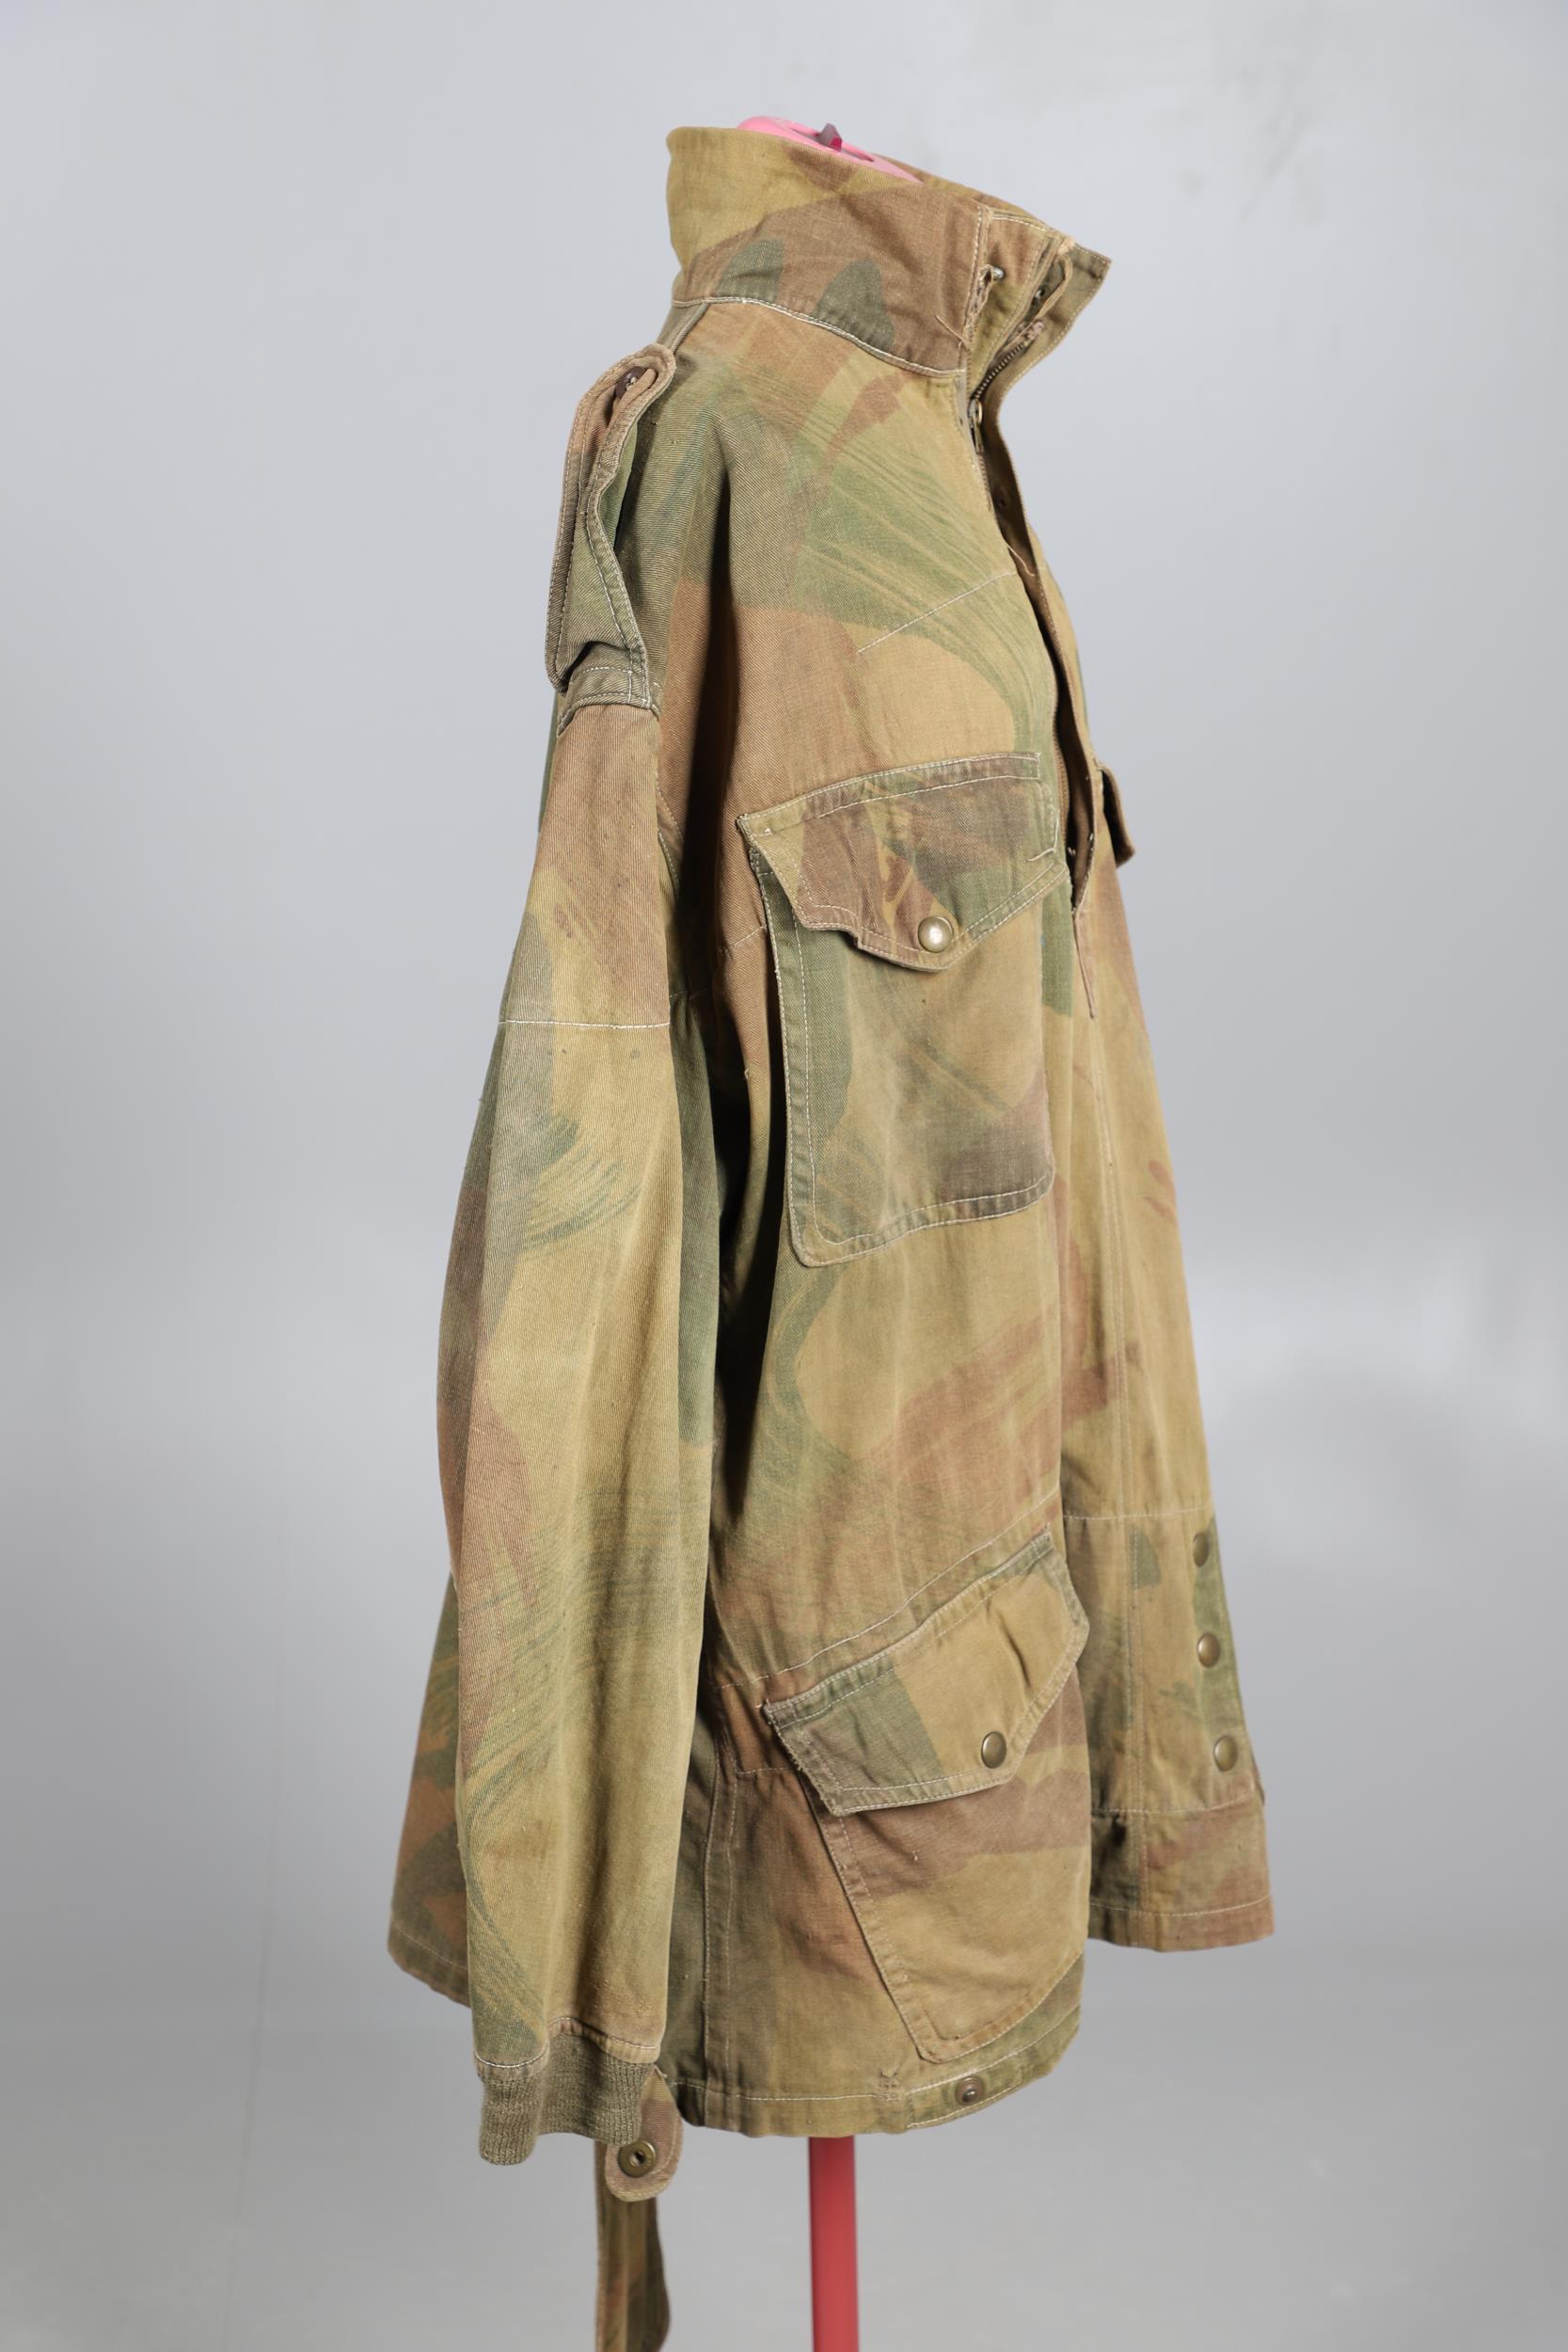 A SECOND WORLD WAR PERIOD 1943 PATTERN DENISON SMOCK. - Image 8 of 12